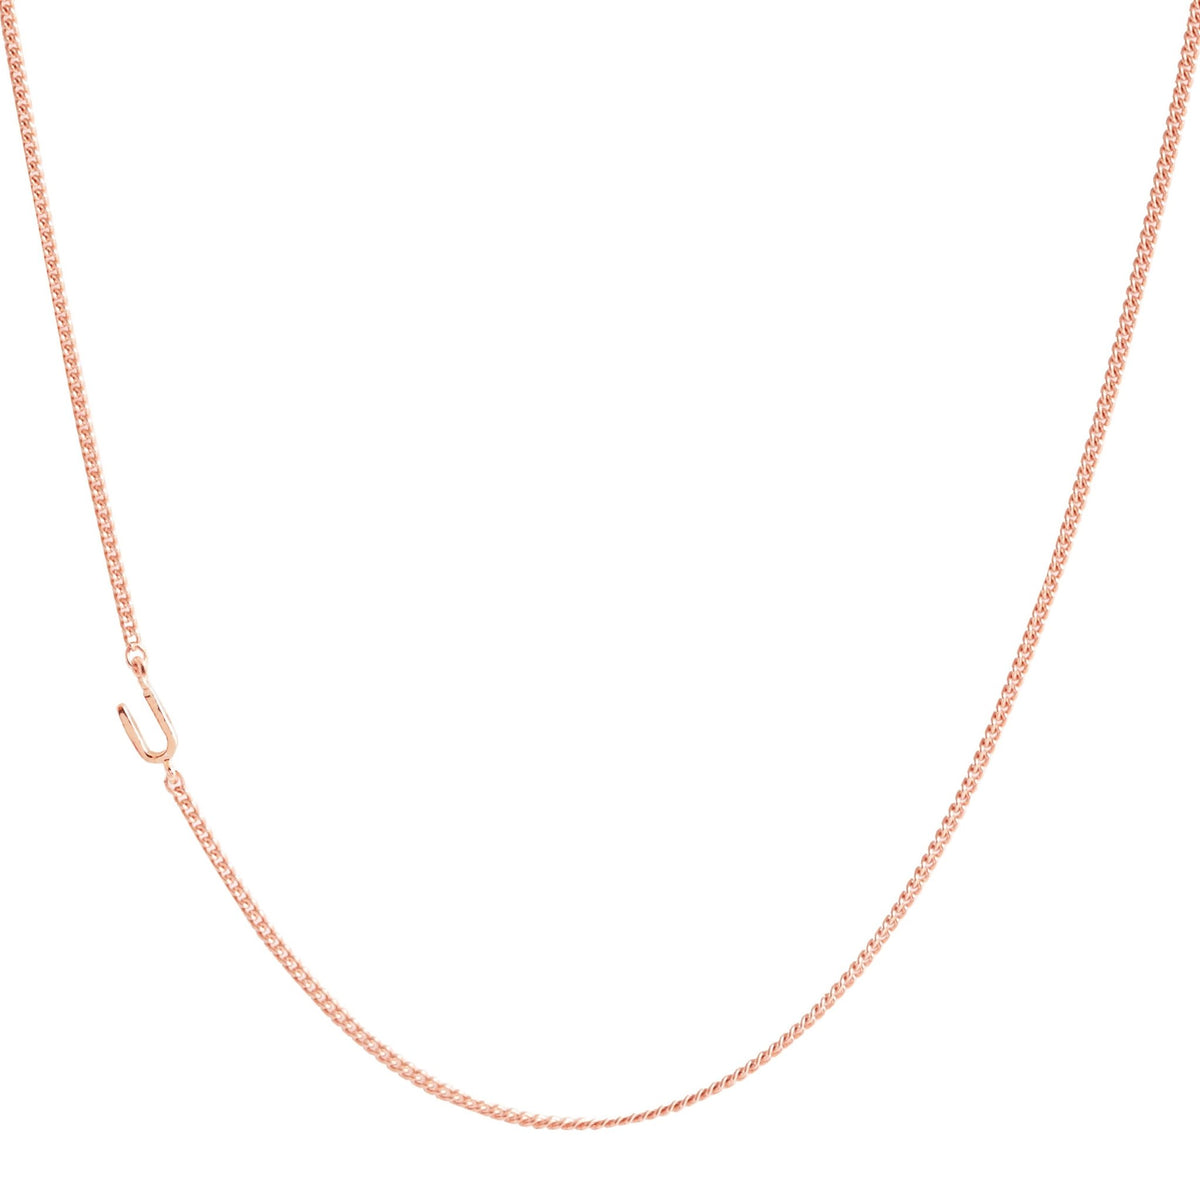 NOTABLE OFFSET INITIAL NECKLACE - U - GOLD, ROSE GOLD, OR SILVER - SO PRETTY CARA COTTER